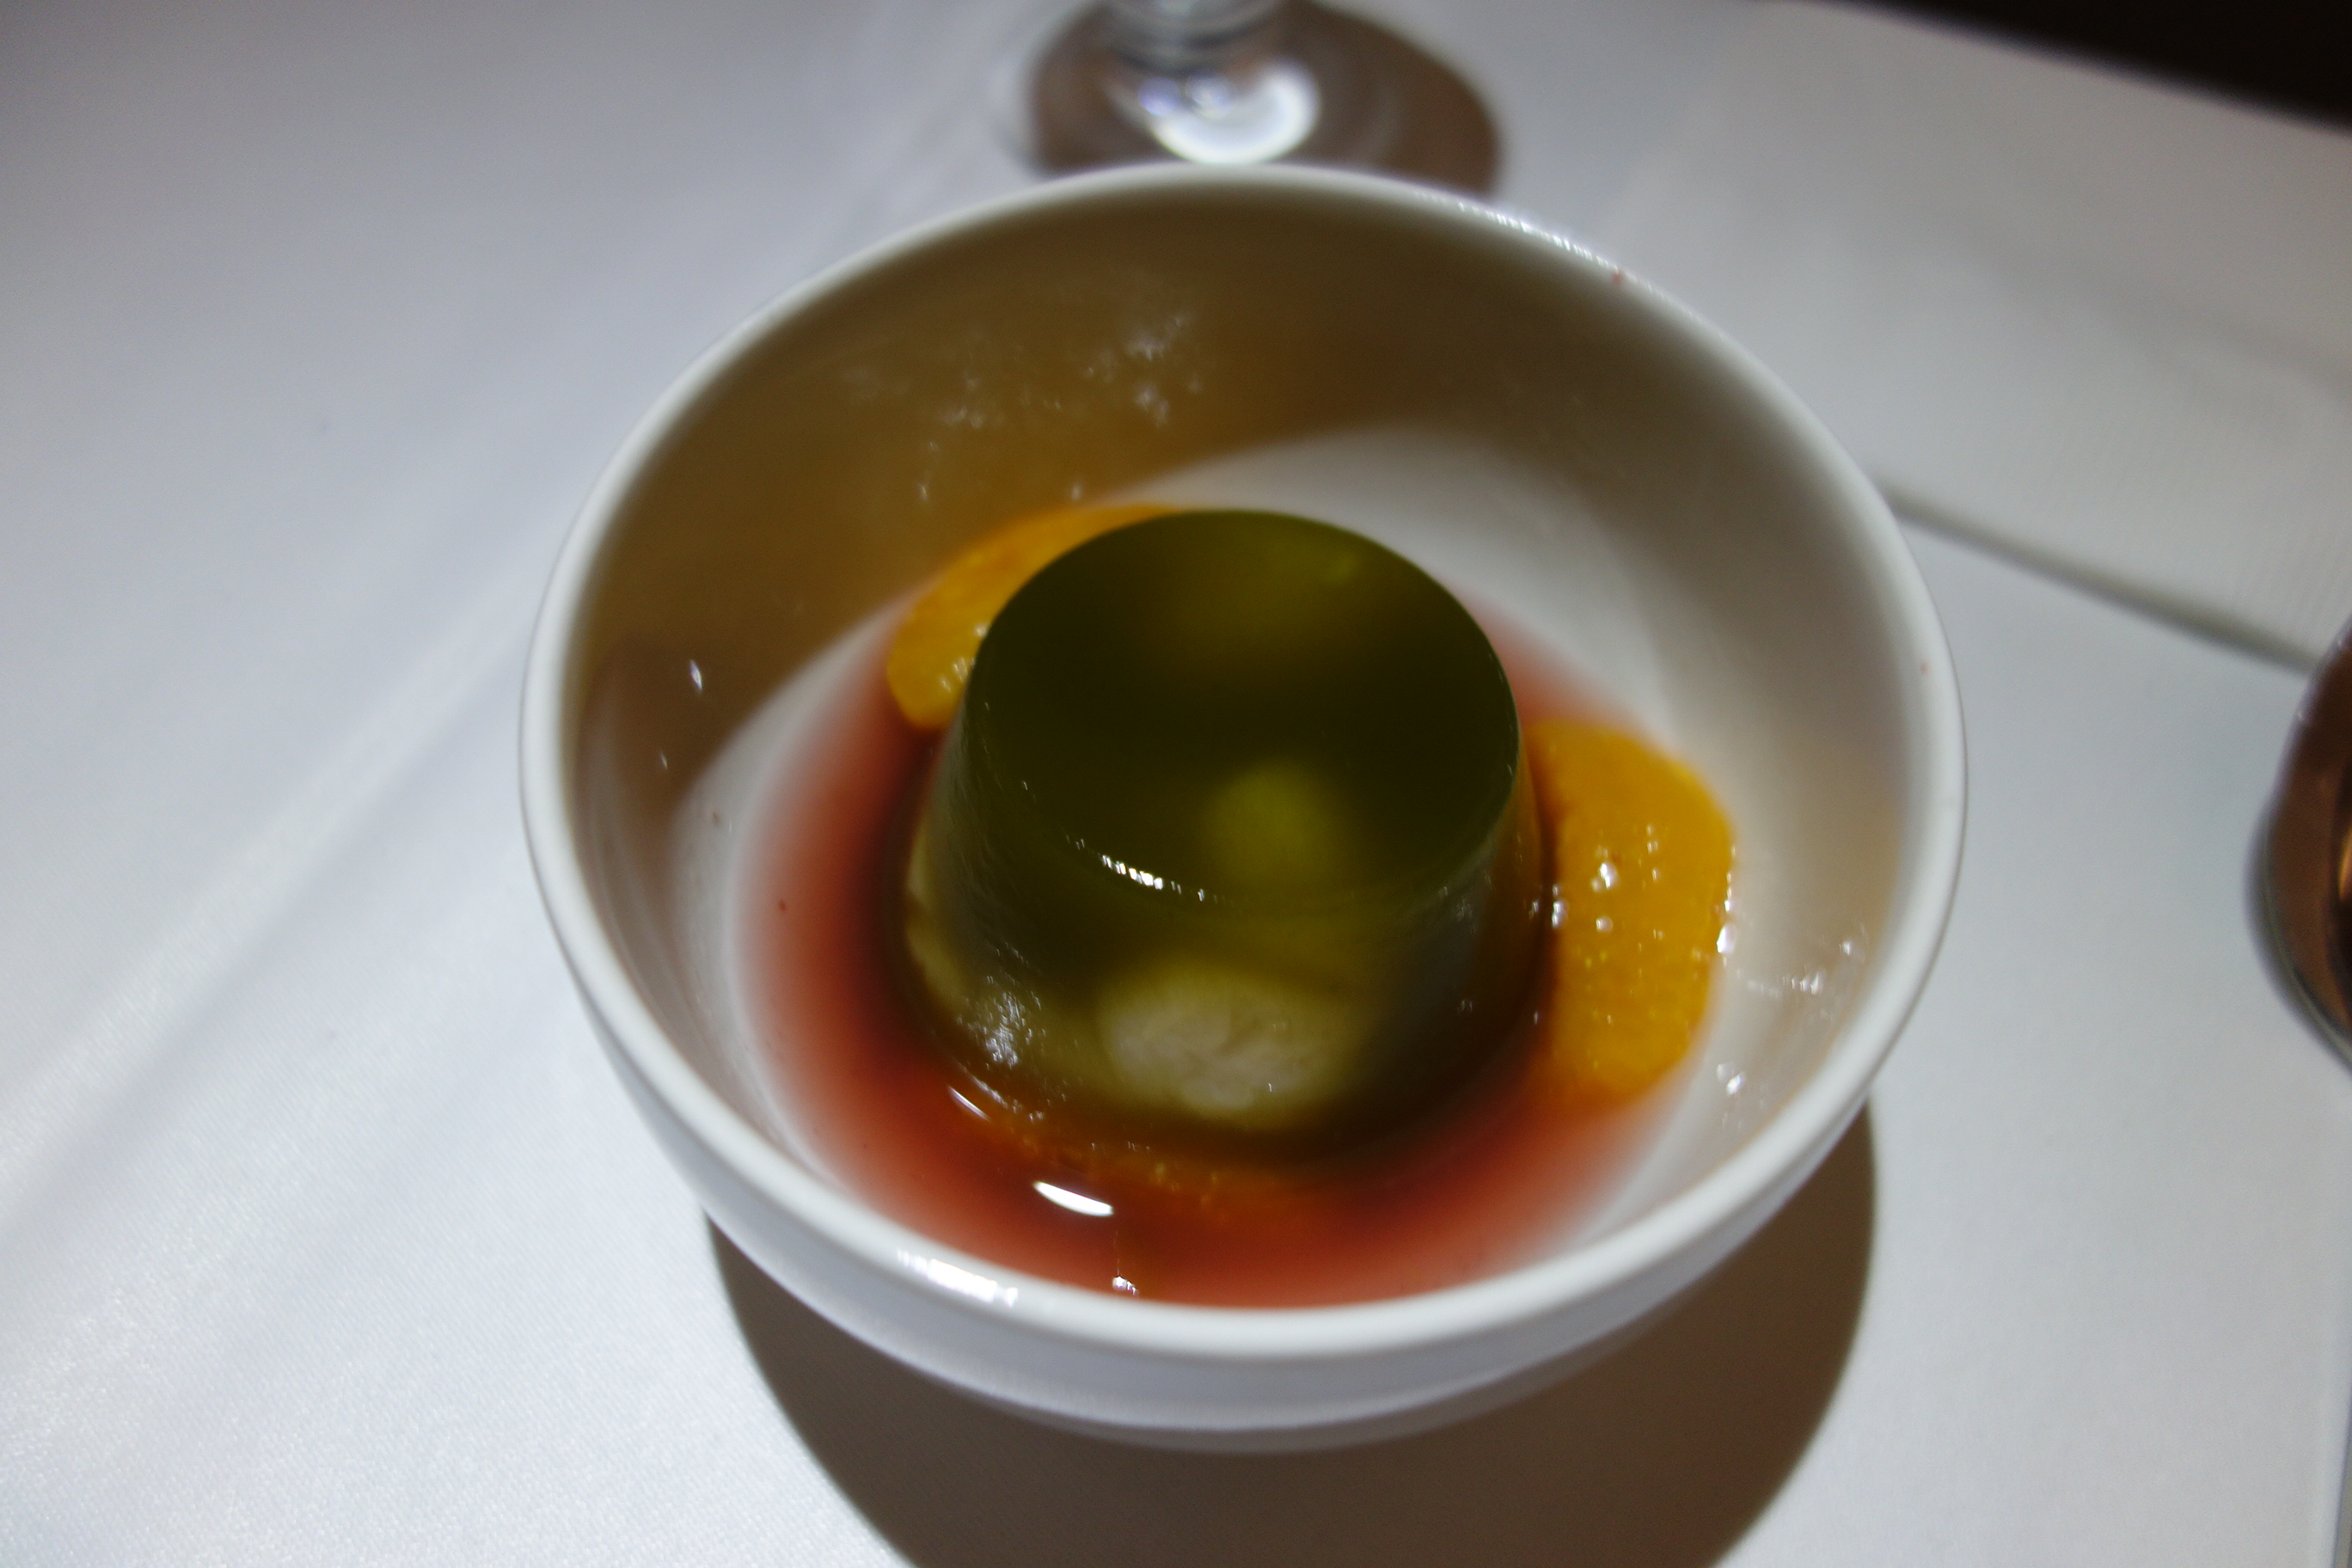 Jelly dessert with litchi (?) inside